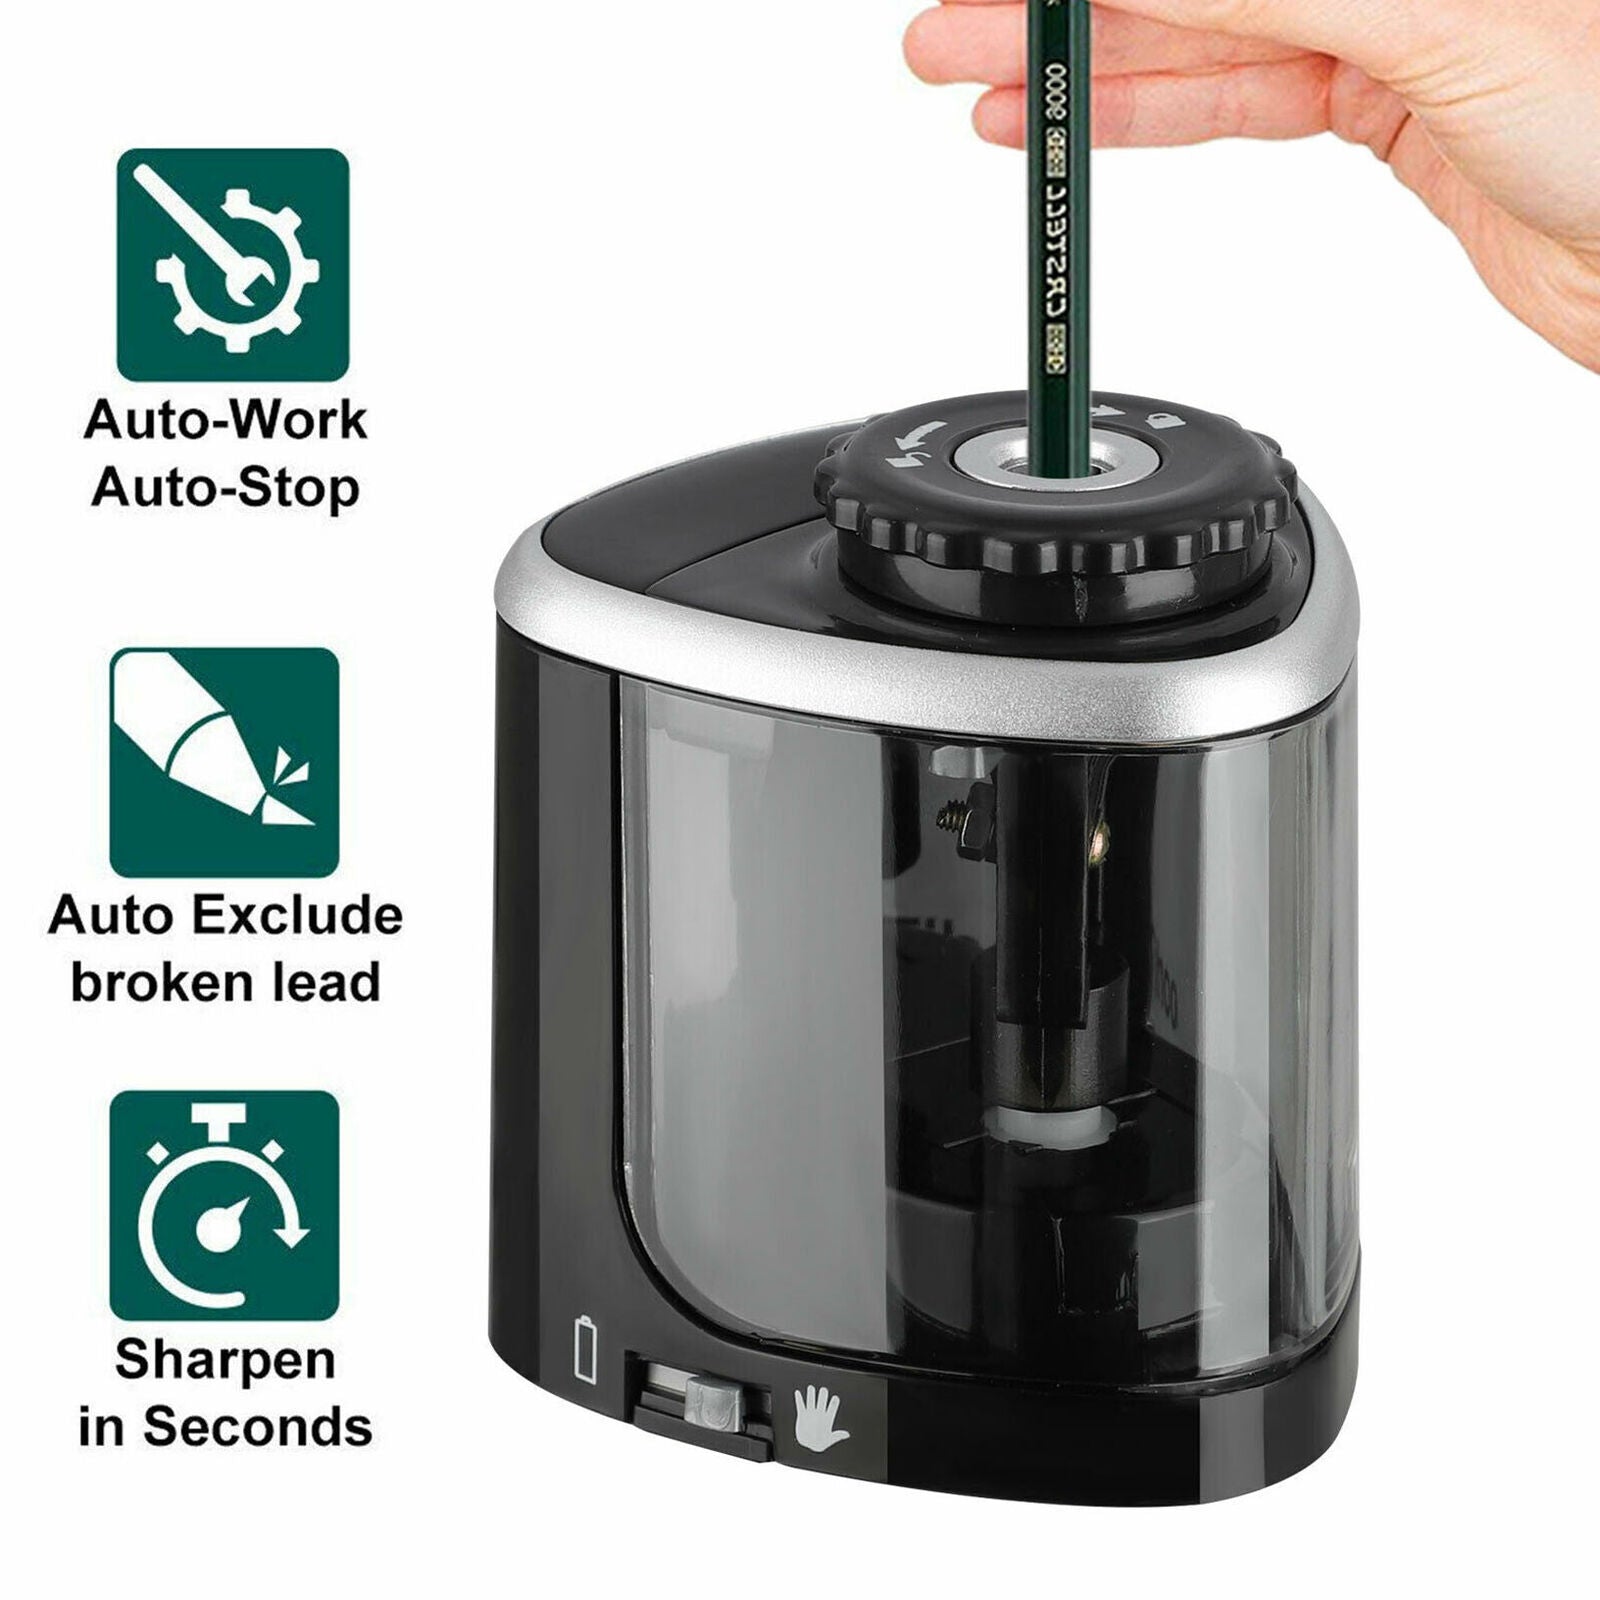 Automatic Electric Touch Switch Pencil Sharpener Home Office School Classroom